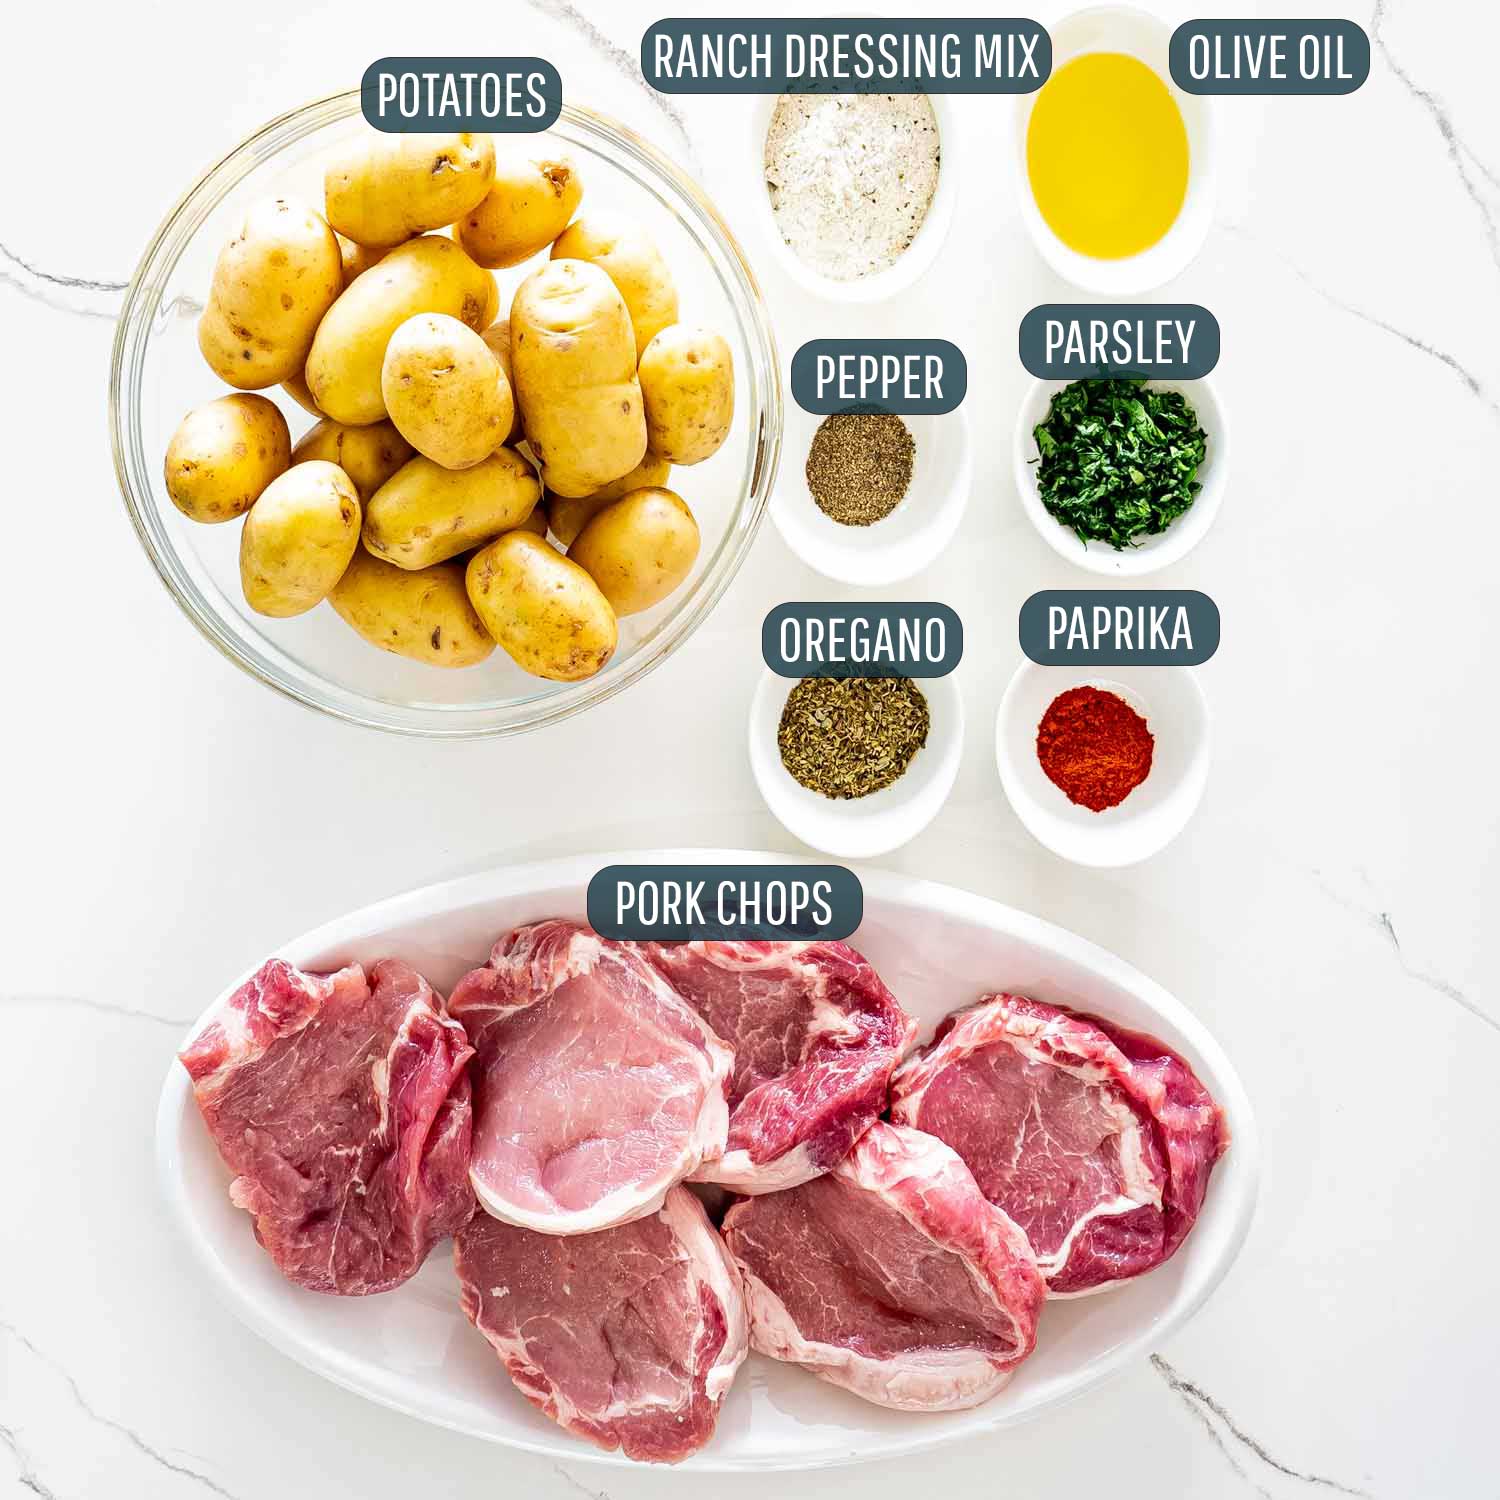 ingredients needed to make ranch pork chops and potatoes.